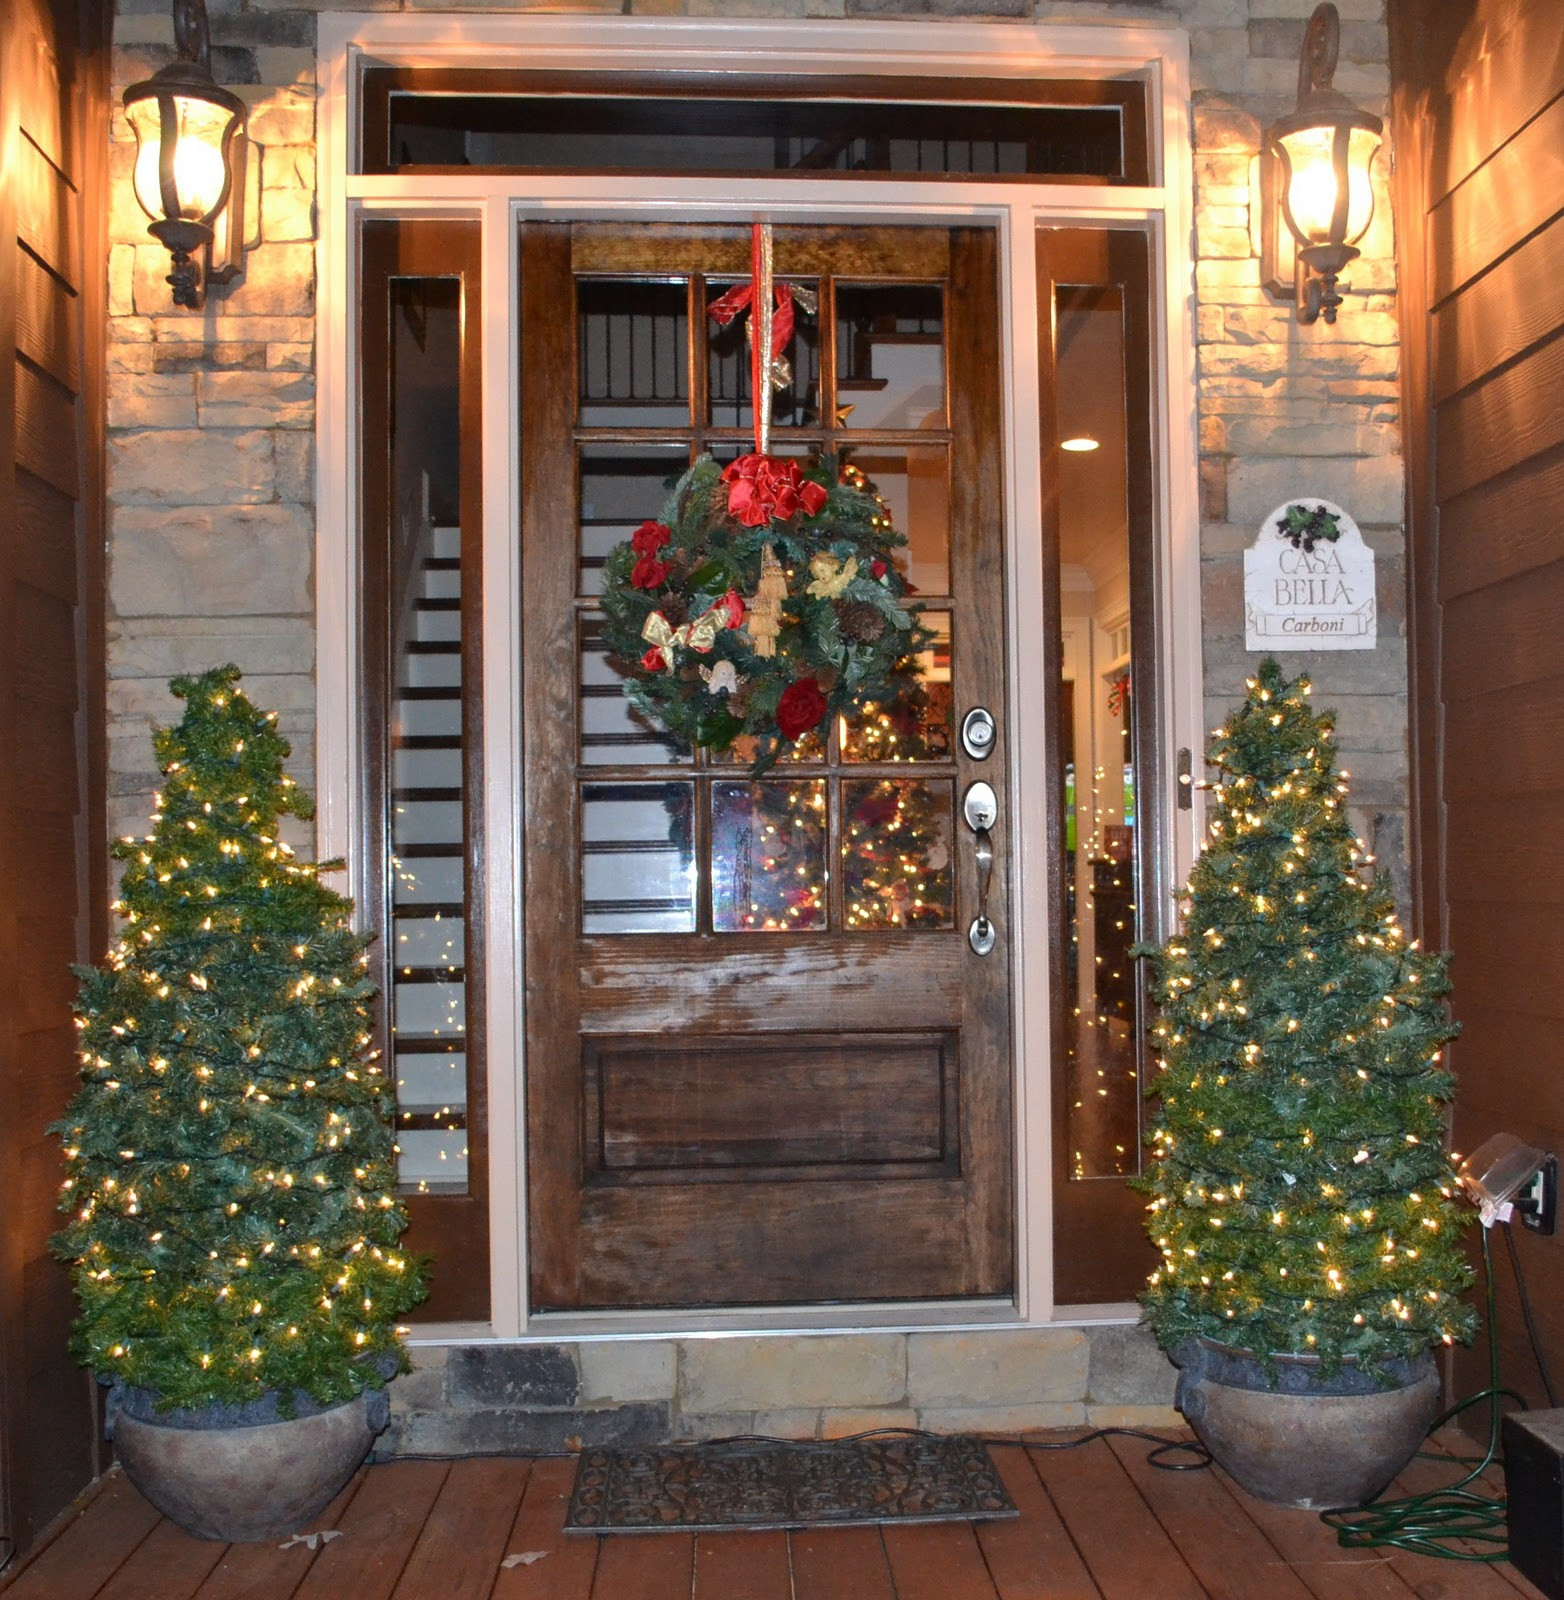 Prelit Porch Christmas Trees
 Southern Accents Christmas Trees for the Porch